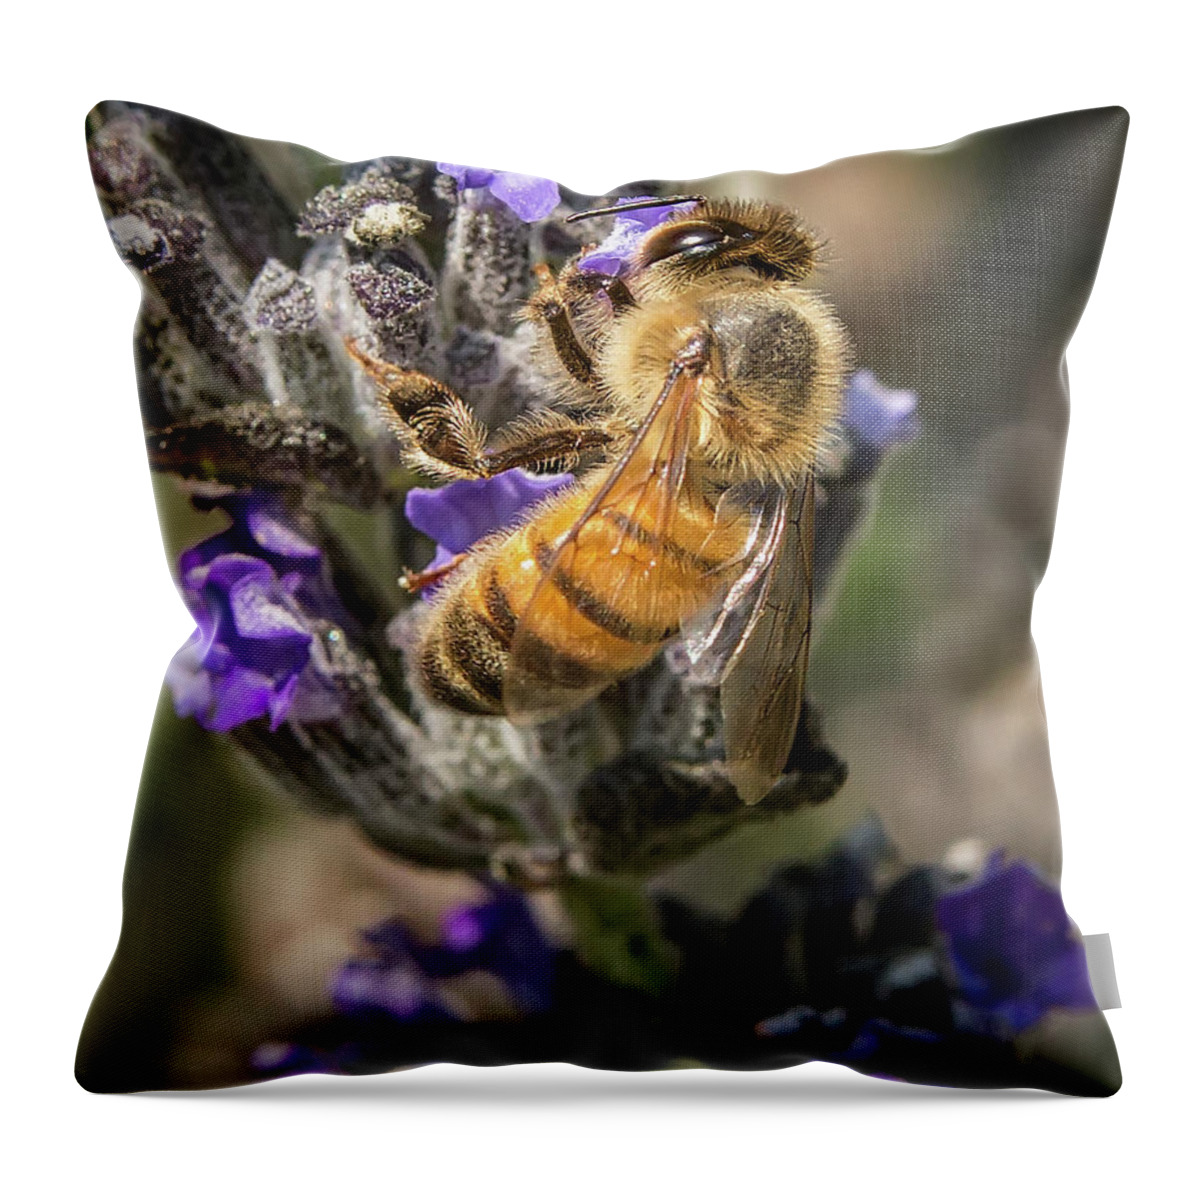 Bee Throw Pillow featuring the photograph Bee 4 by Endre Balogh